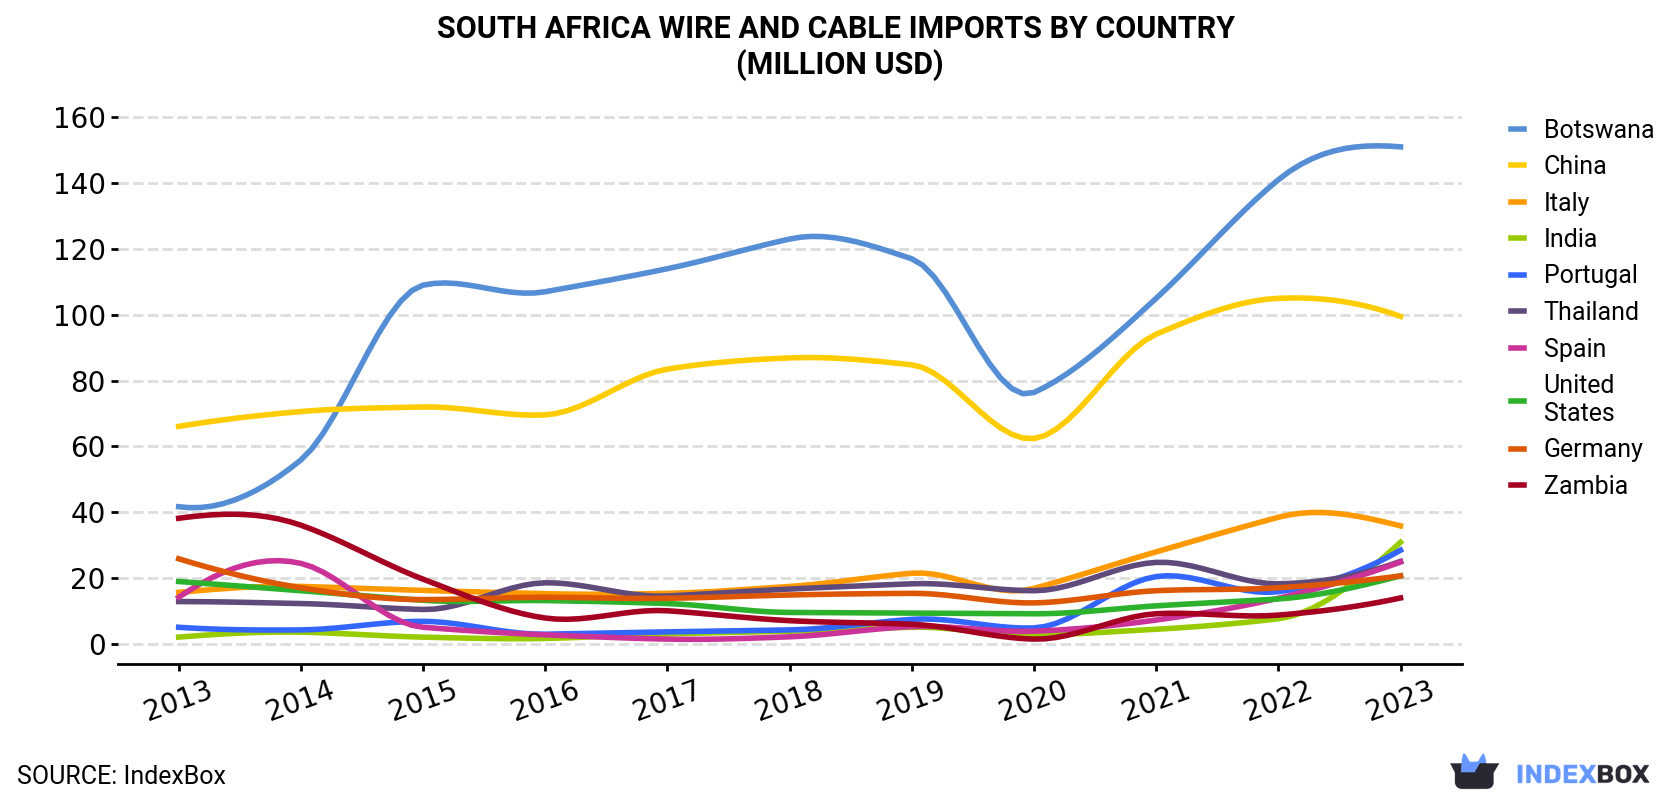 South Africa Wire And Cable Imports By Country (Million USD)